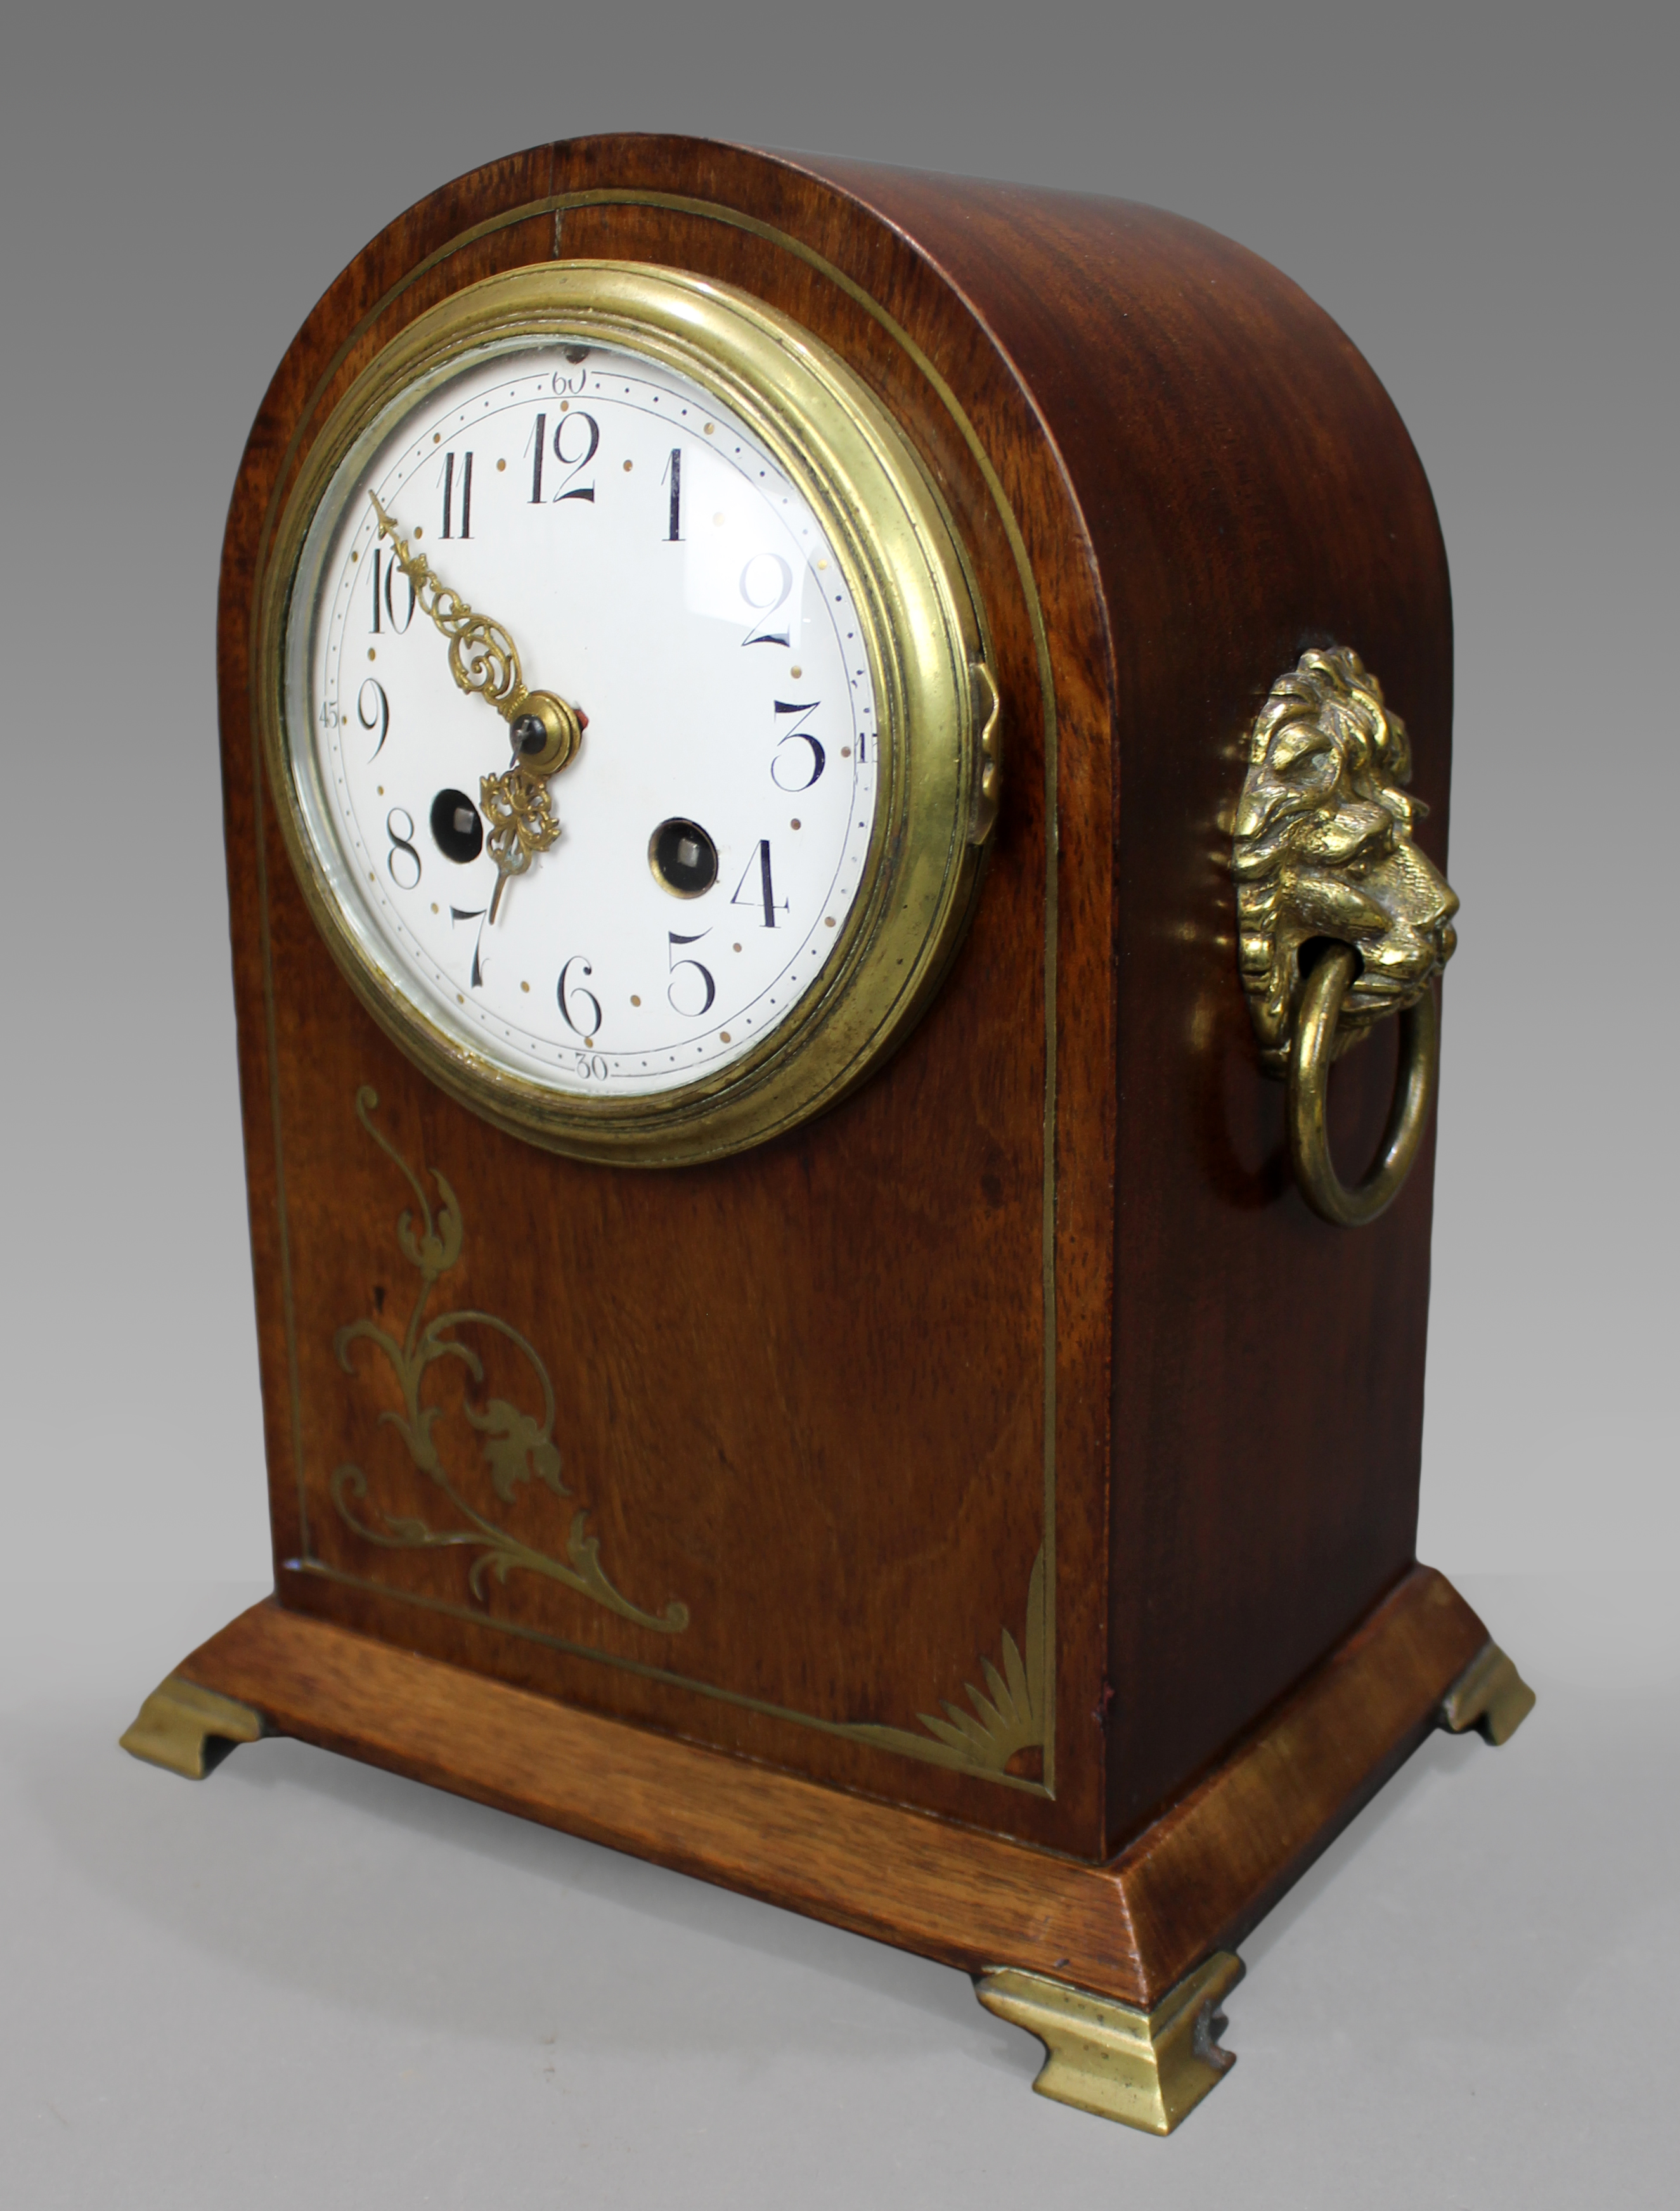 French Mahogany Brass Inlaid Mantle Clock c.1900 by Marti - Image 4 of 4